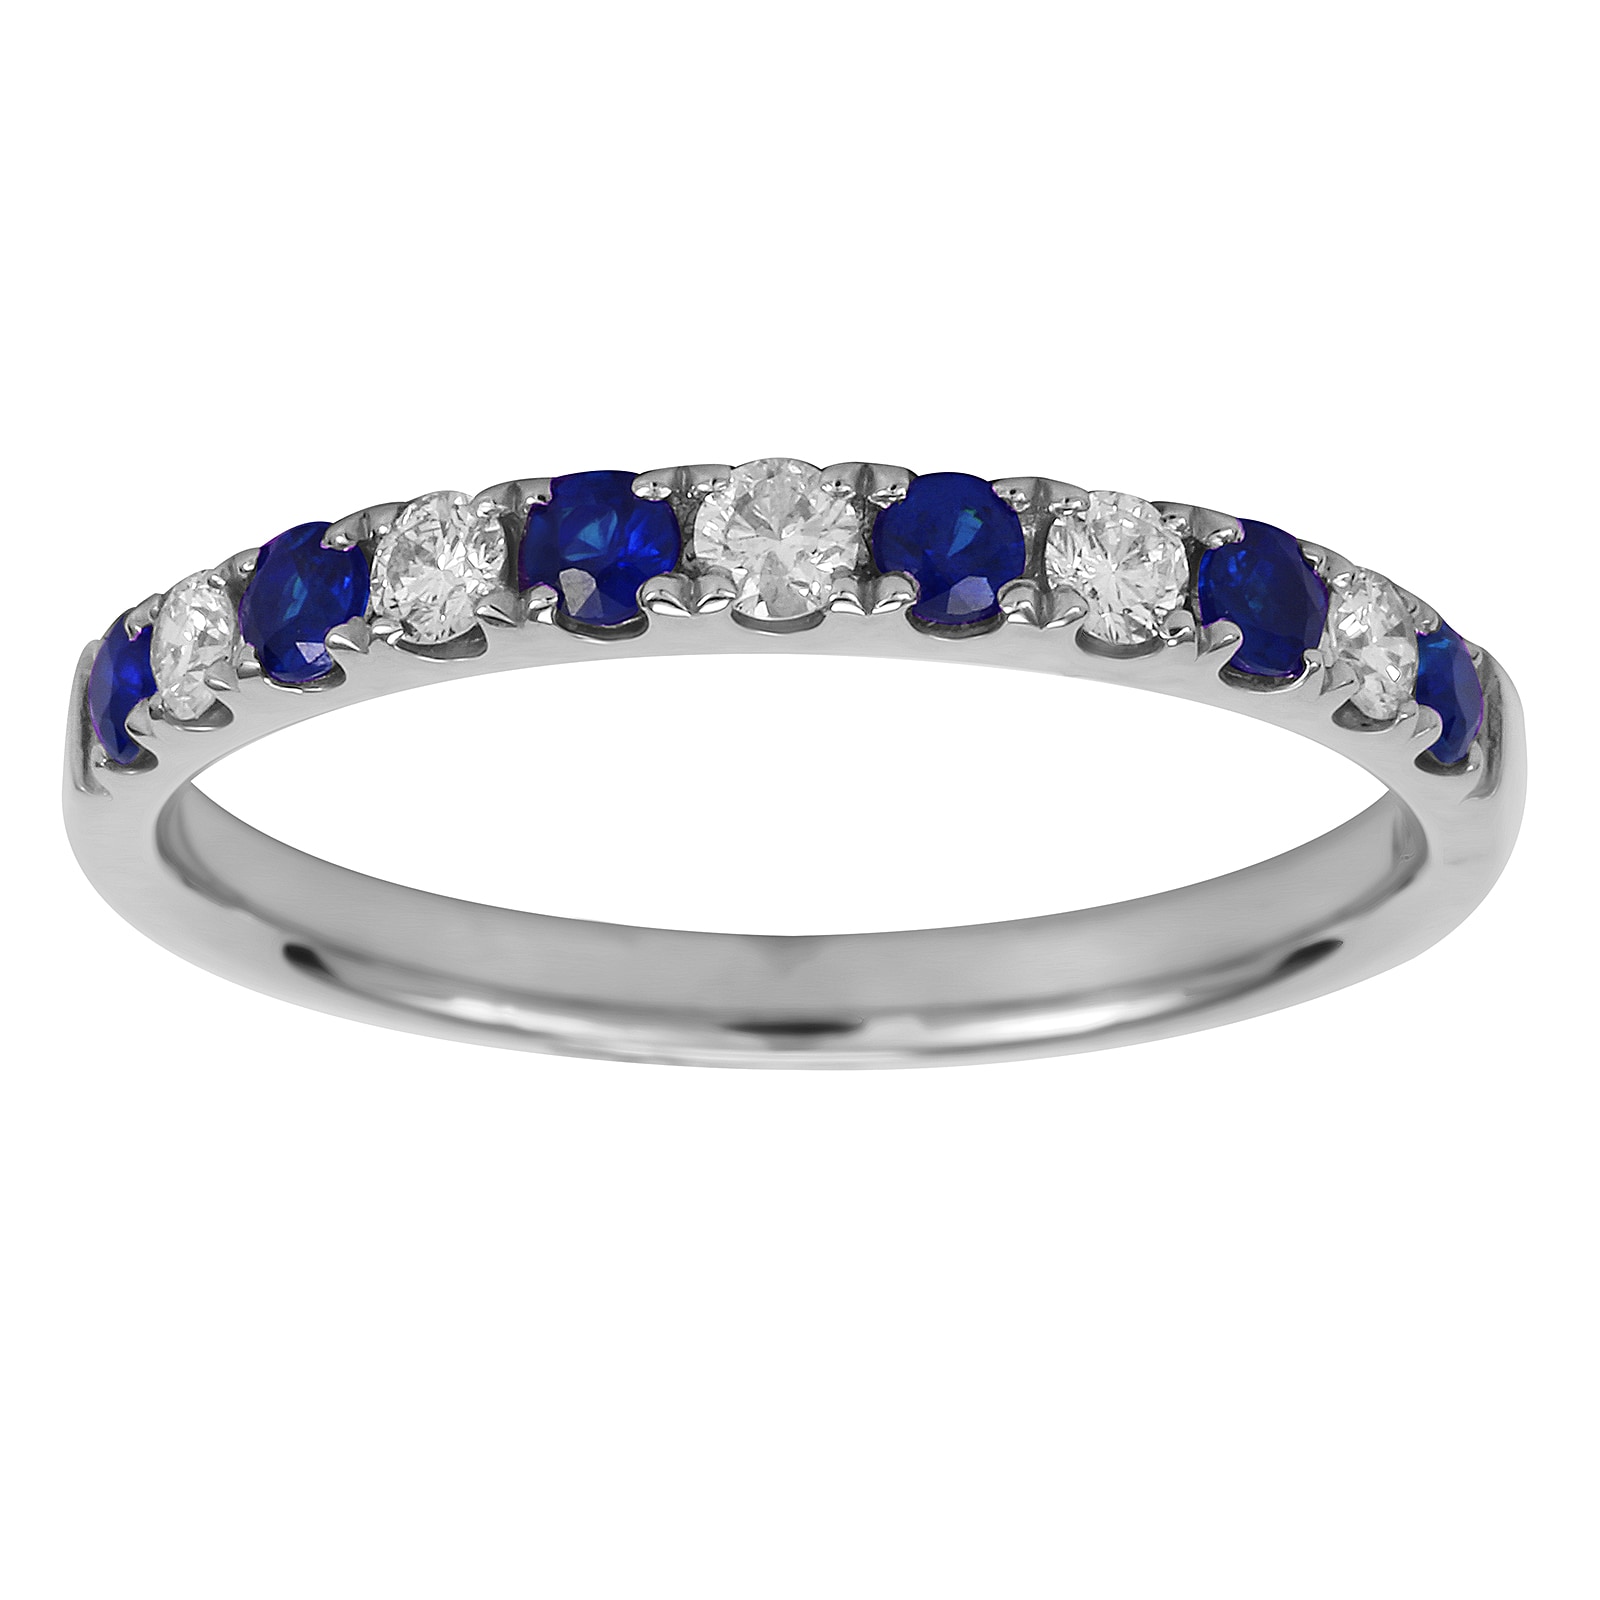 18ct White Gold 0.20ct Diamond & Sapphire Eternity Rings - Ring Size N